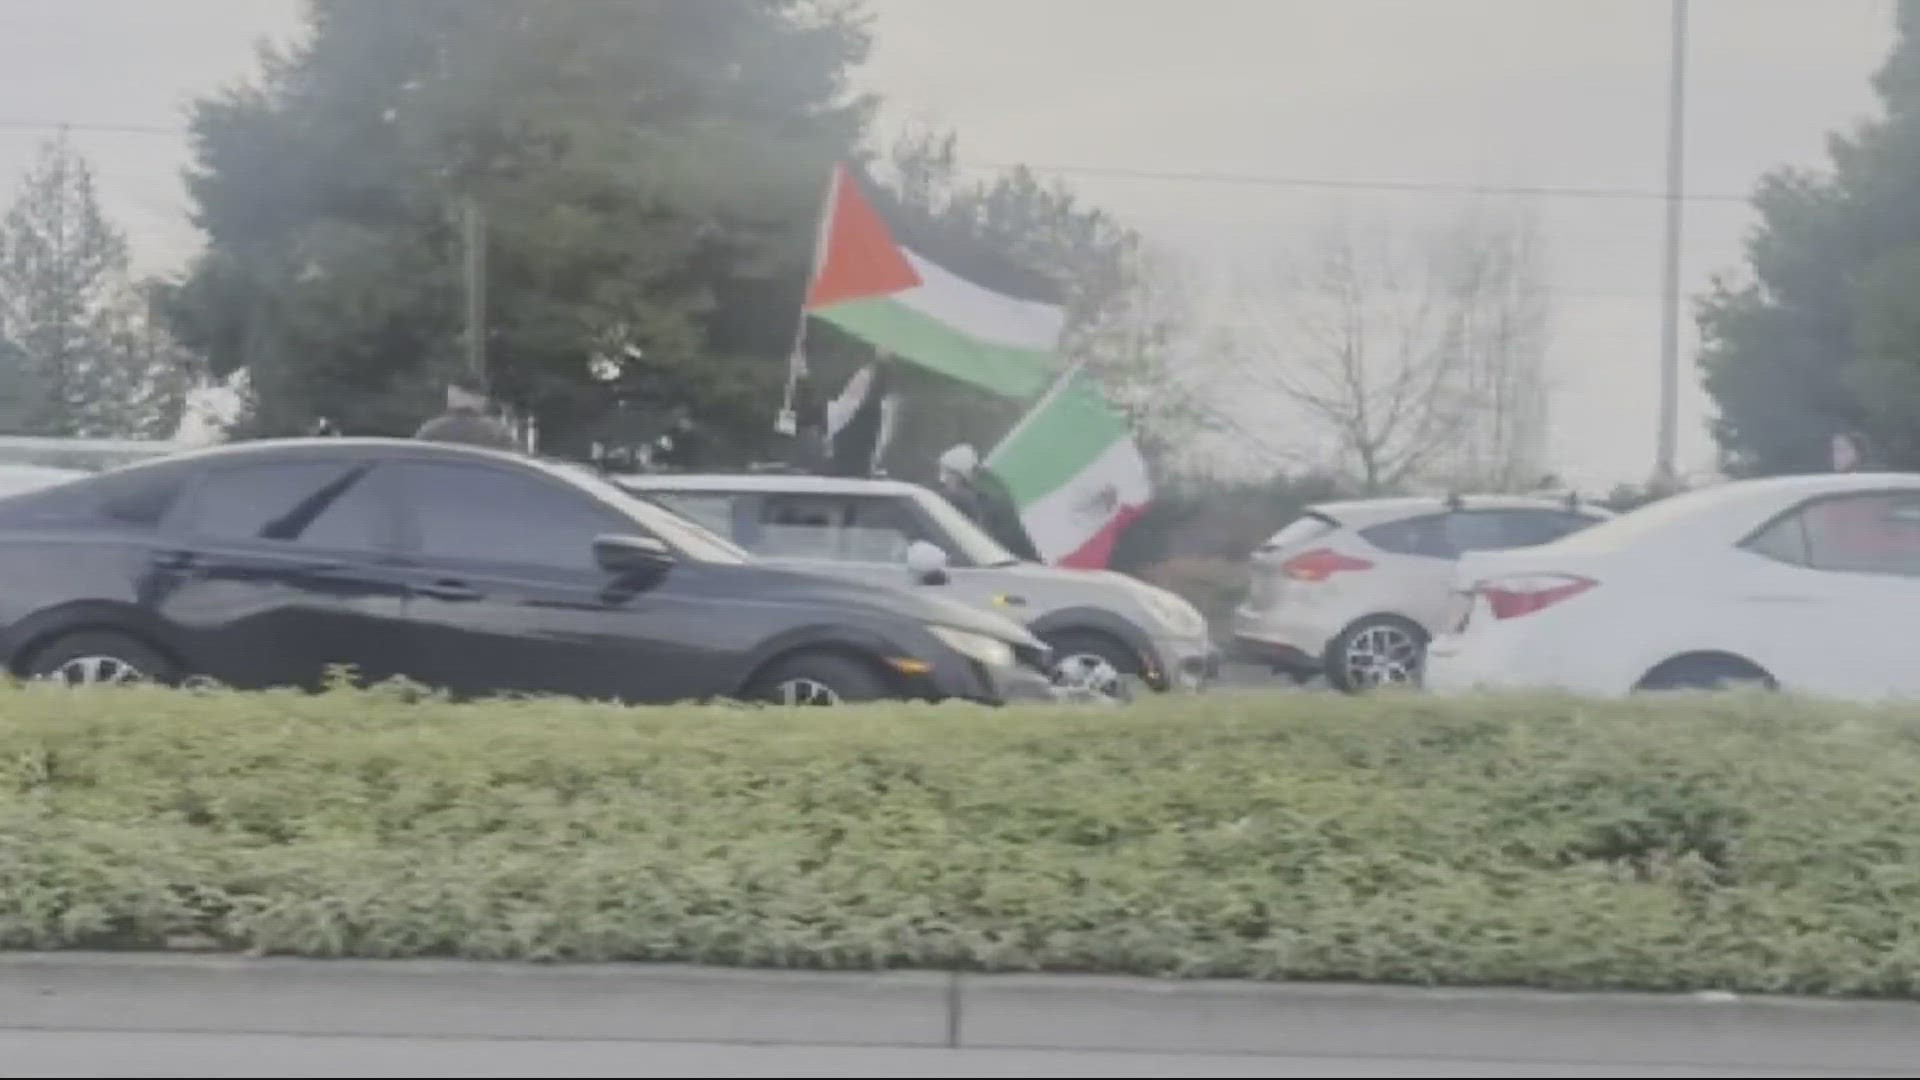 About 50 cars blocked inbound lanes on Airport Way to protest the war in Gaza.